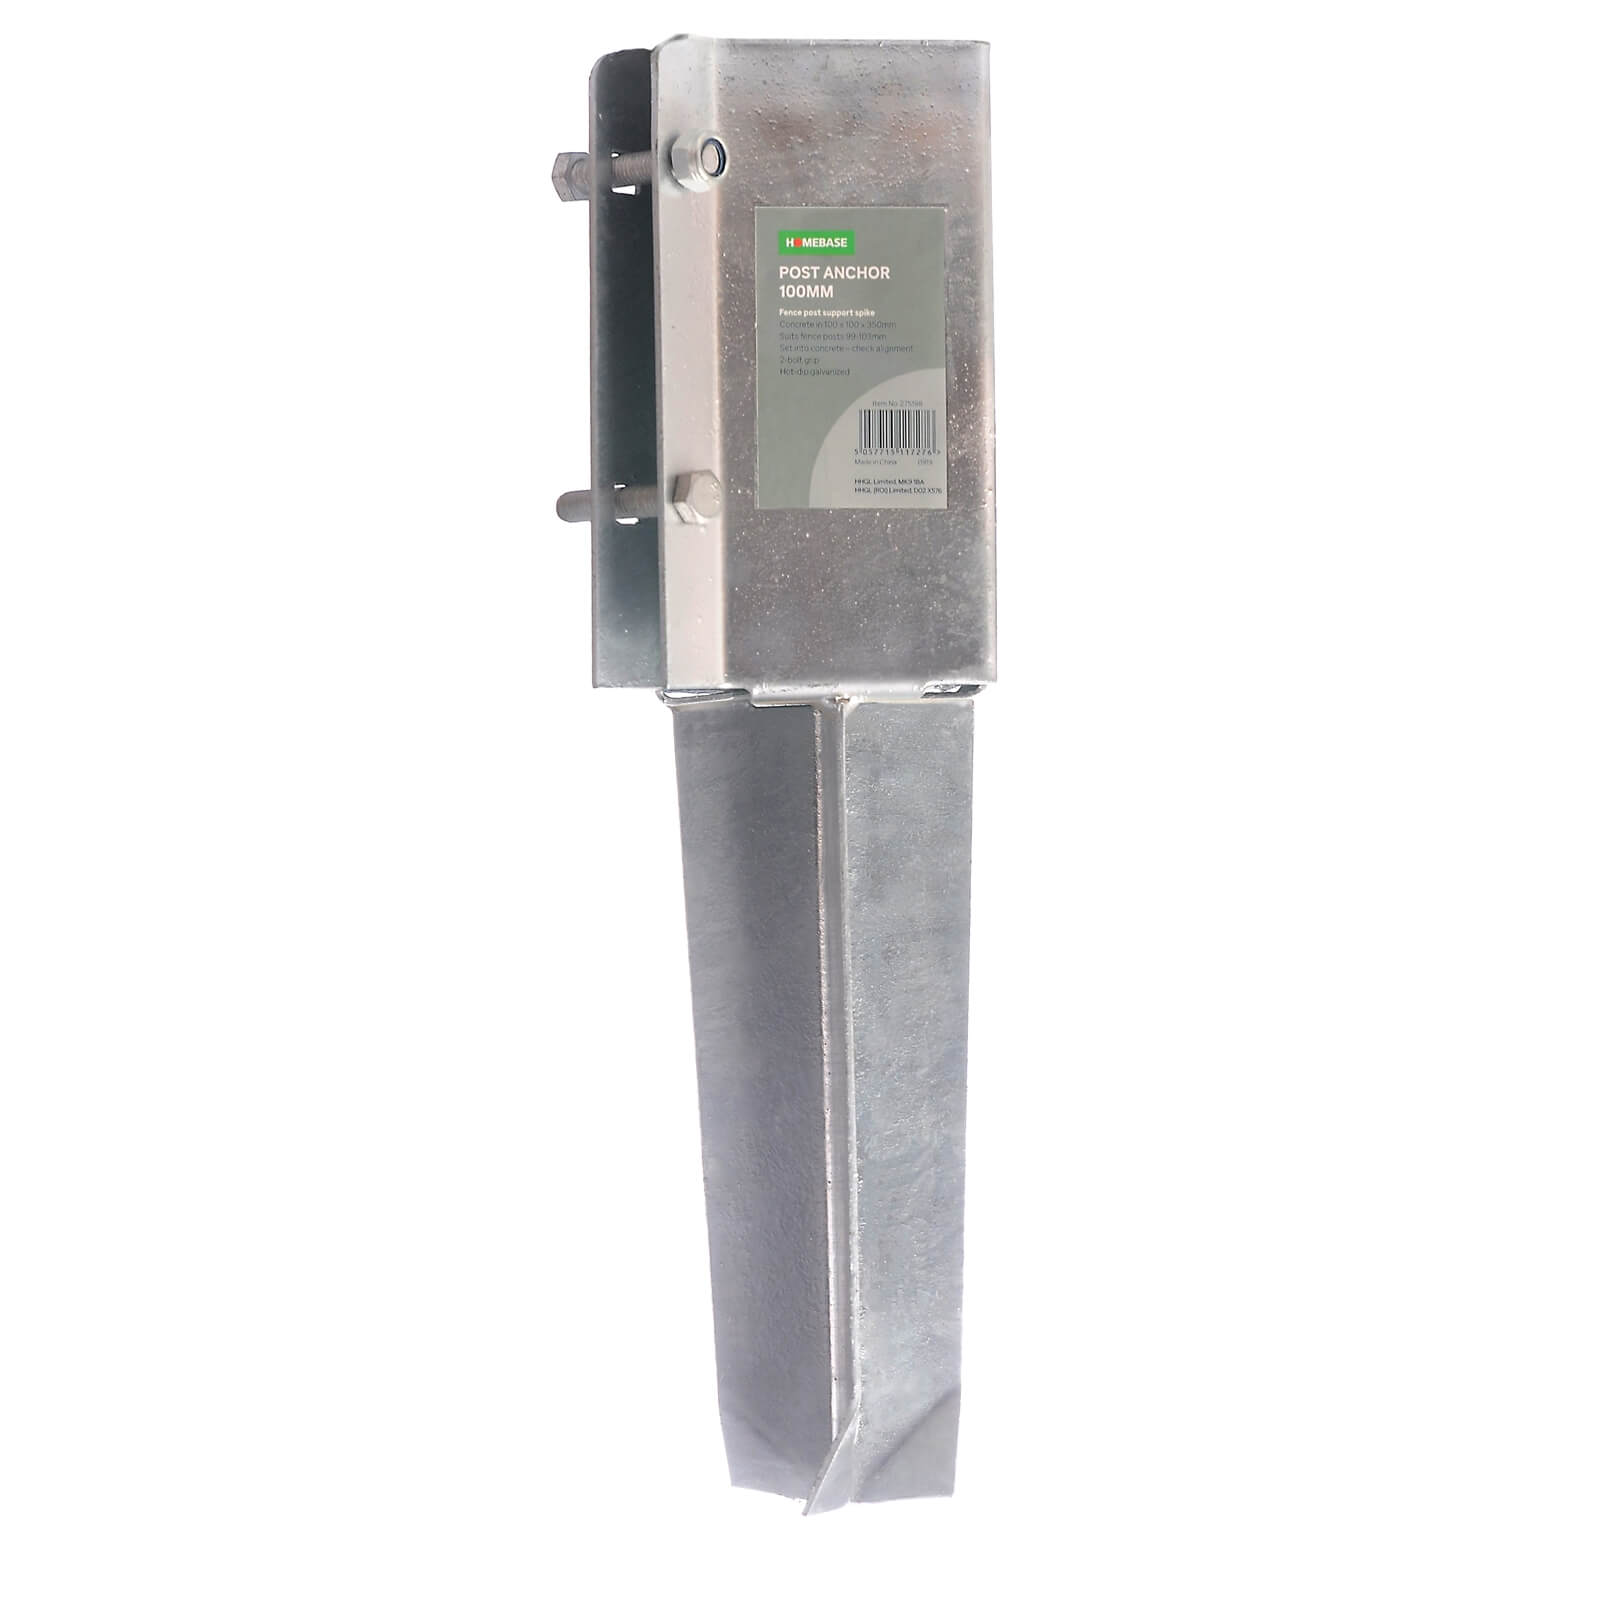 Post Anchor Concrete Fence Post Support Spike - 100mm